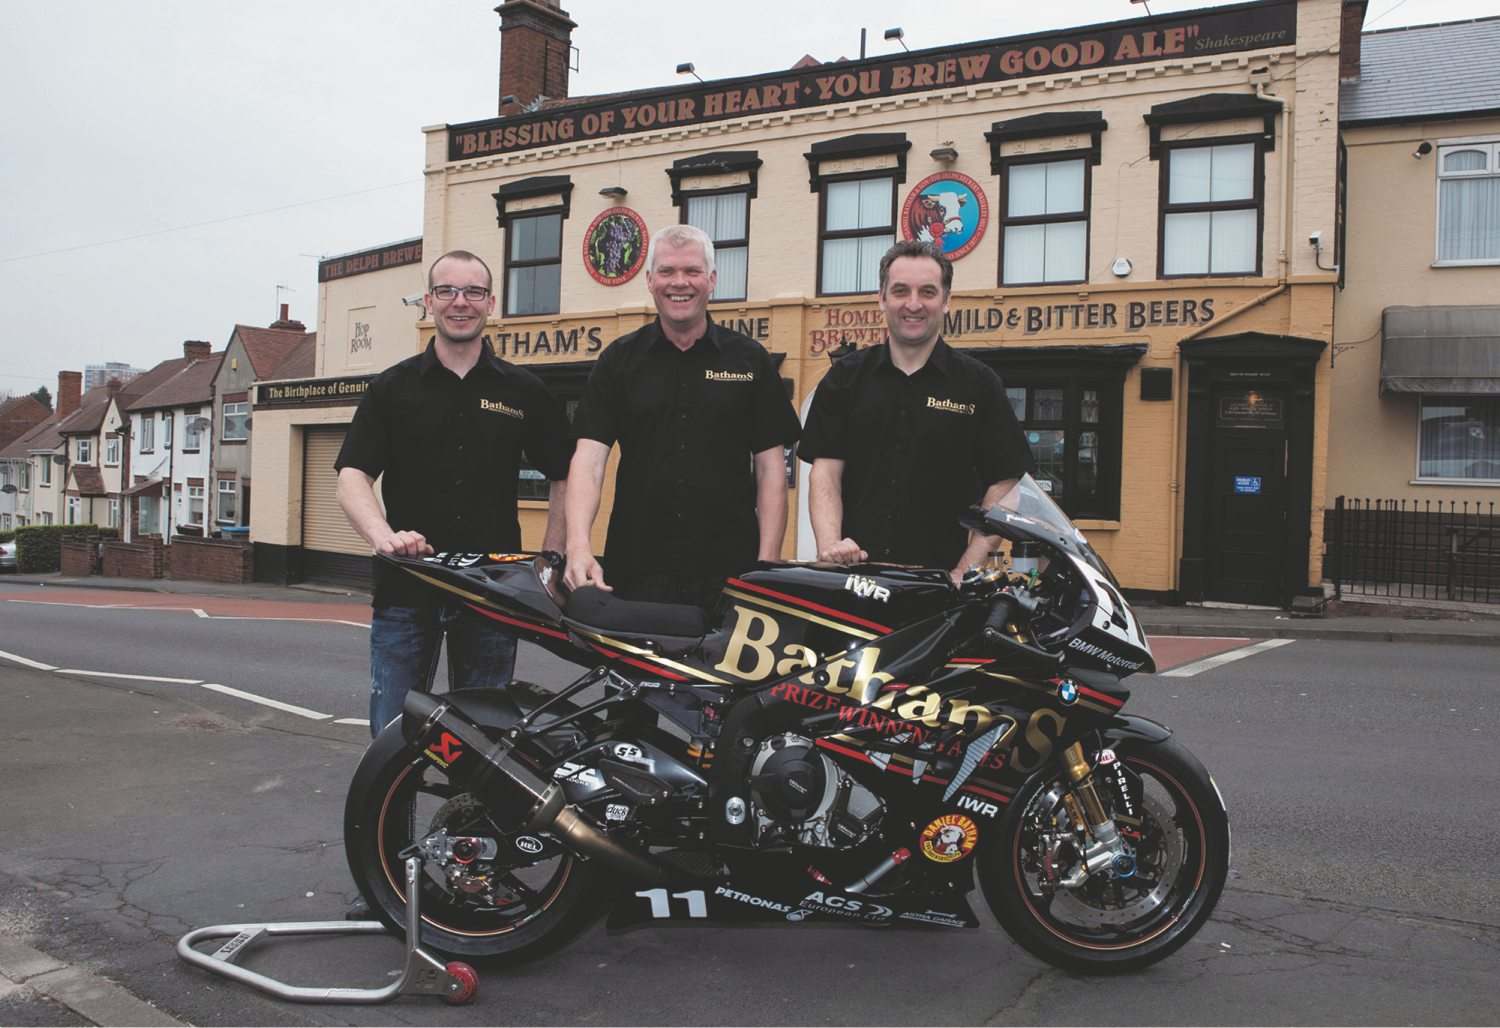 Bathams-BMW-reveal-line-up-of-Rutter-and-Muff